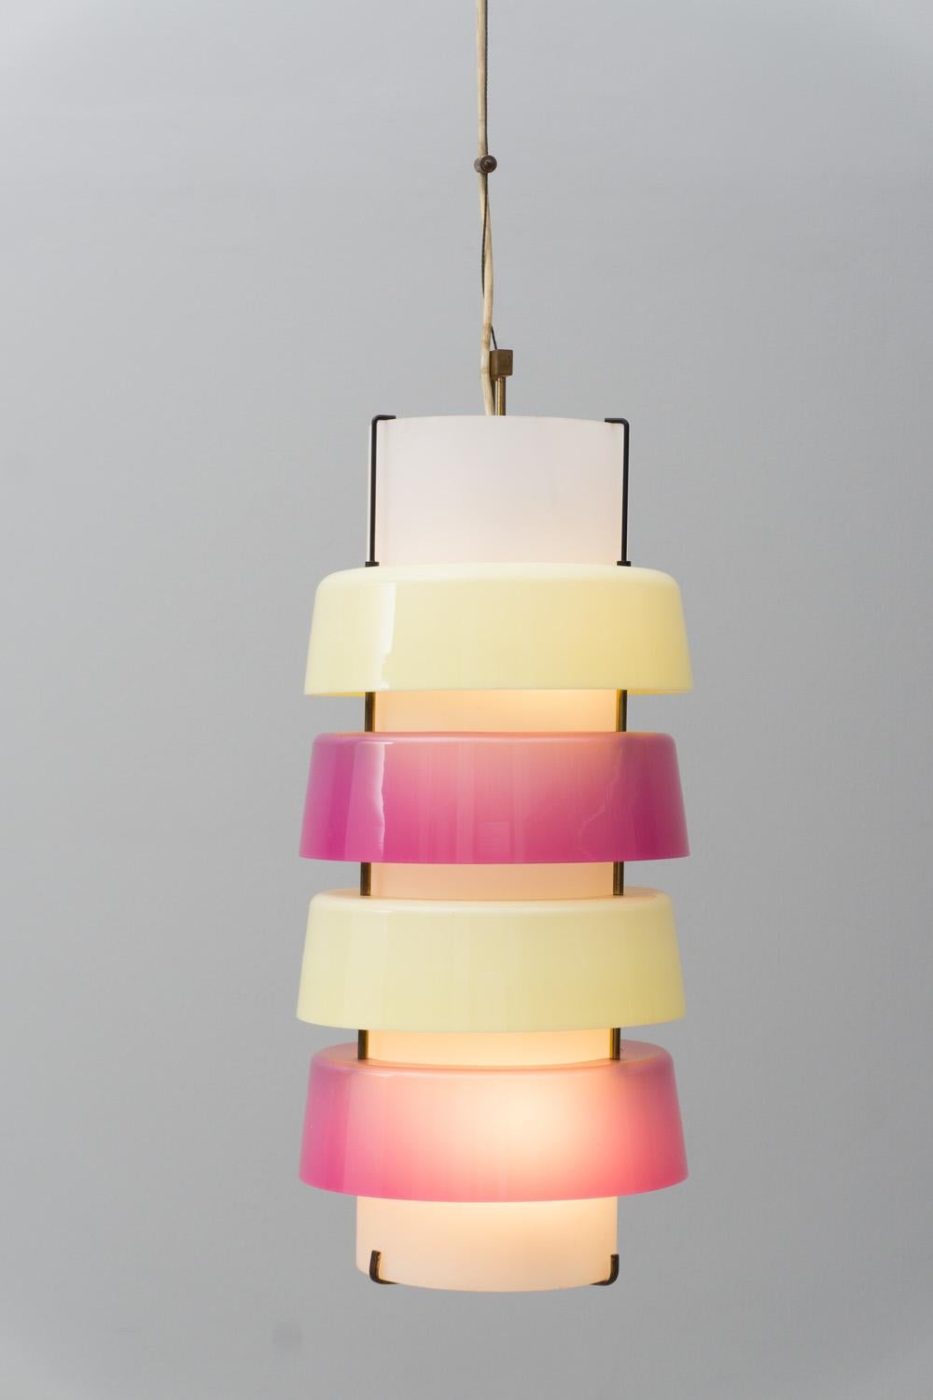 A white cylindrical pendant light with alternating pink and pale-yellow rings by Stilnovo